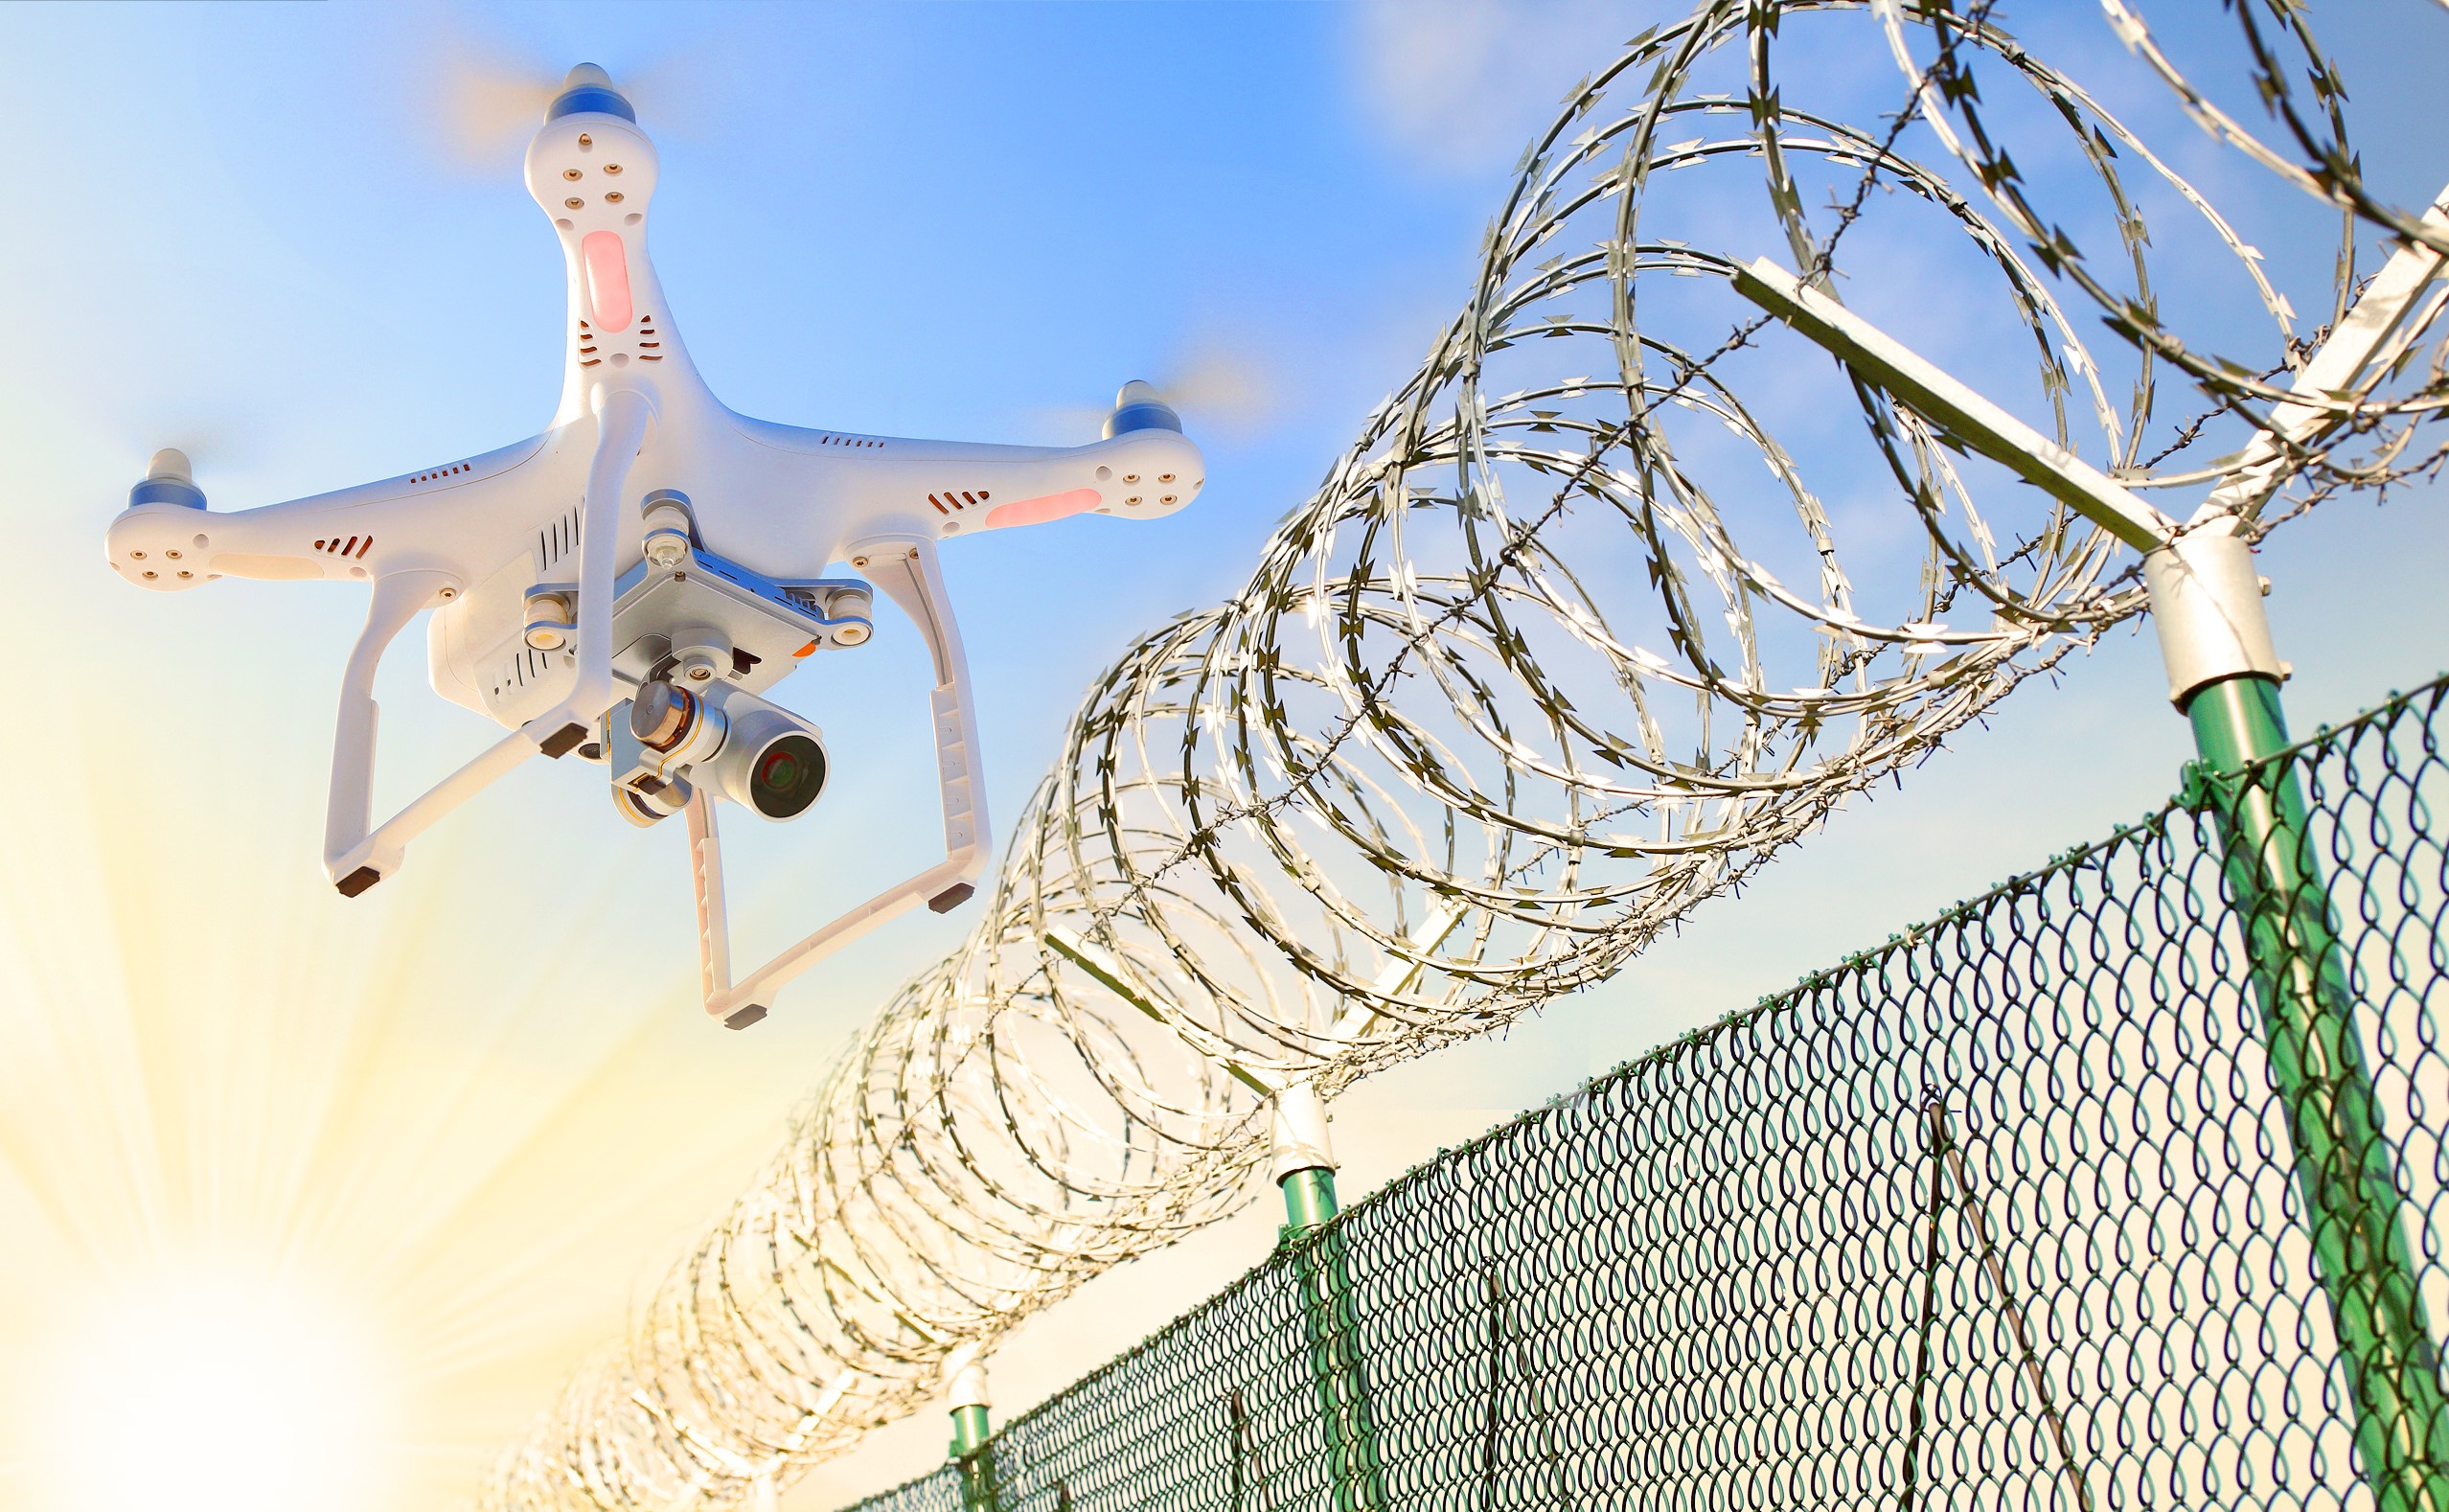 Drone Contraband Drop Foiled at Washington State Prison, Hikal Abdulrahman Arrested - Inmate Lookup